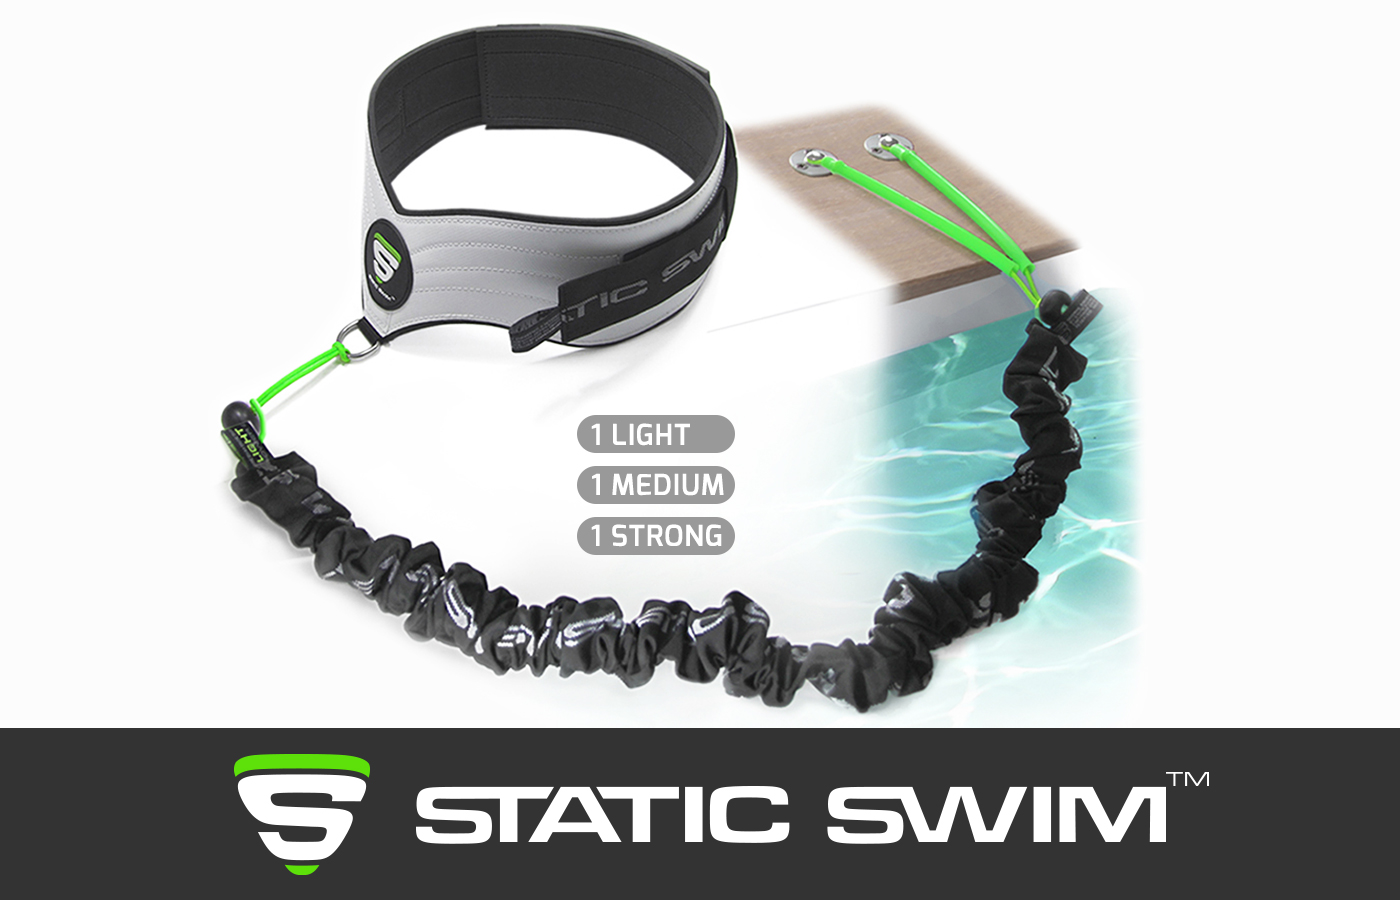 STATIC SWIM™'s swimming harness and resistance band with Wooden Pool Decks attachment